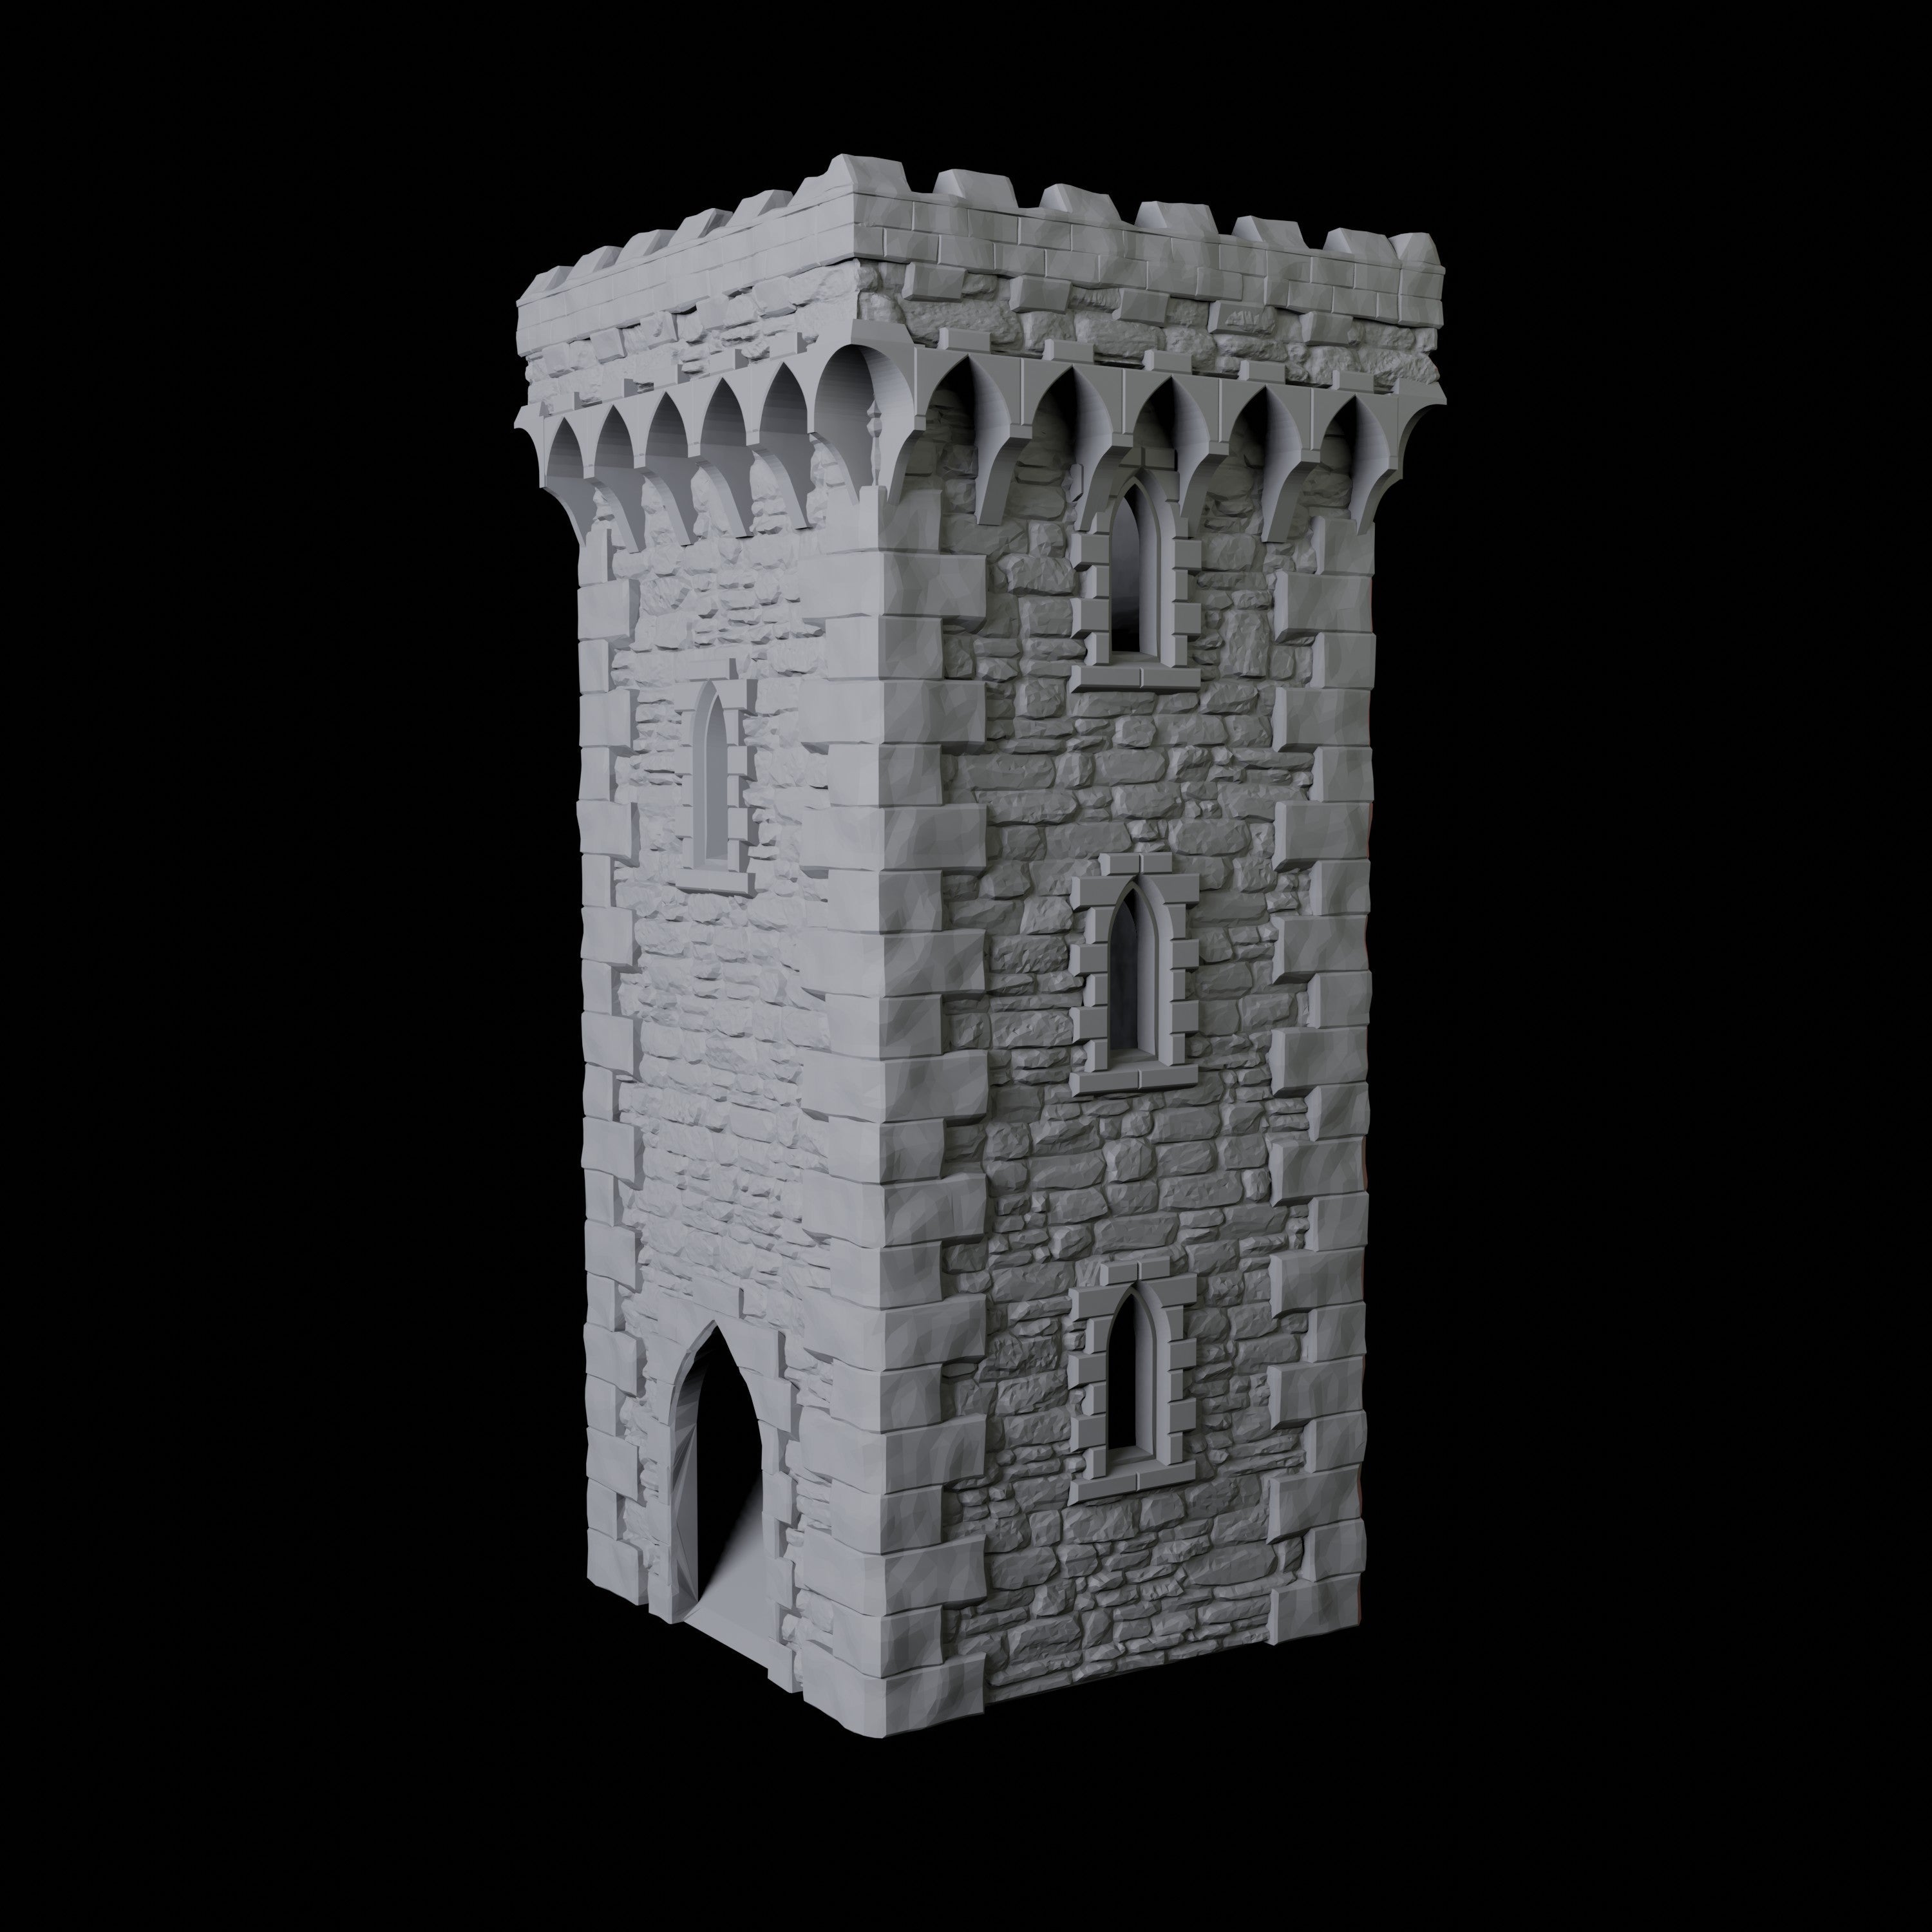 English Castle Dice Tower Miniature for Dungeons and Dragons